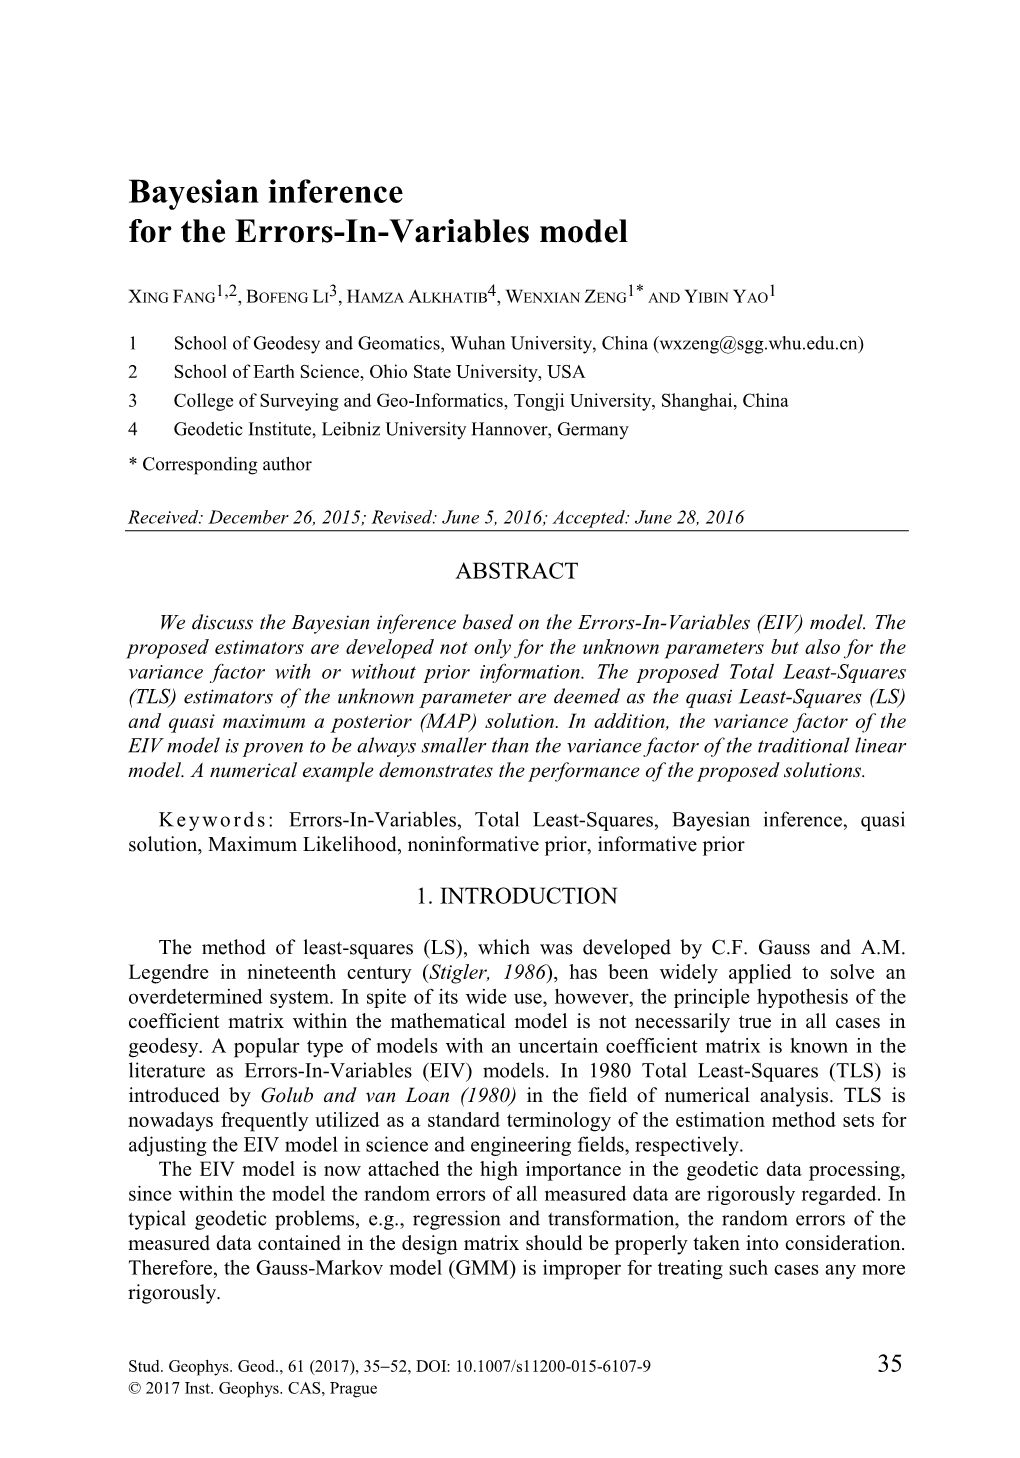 Bayesian Inference for the Errors-In-Variables Model